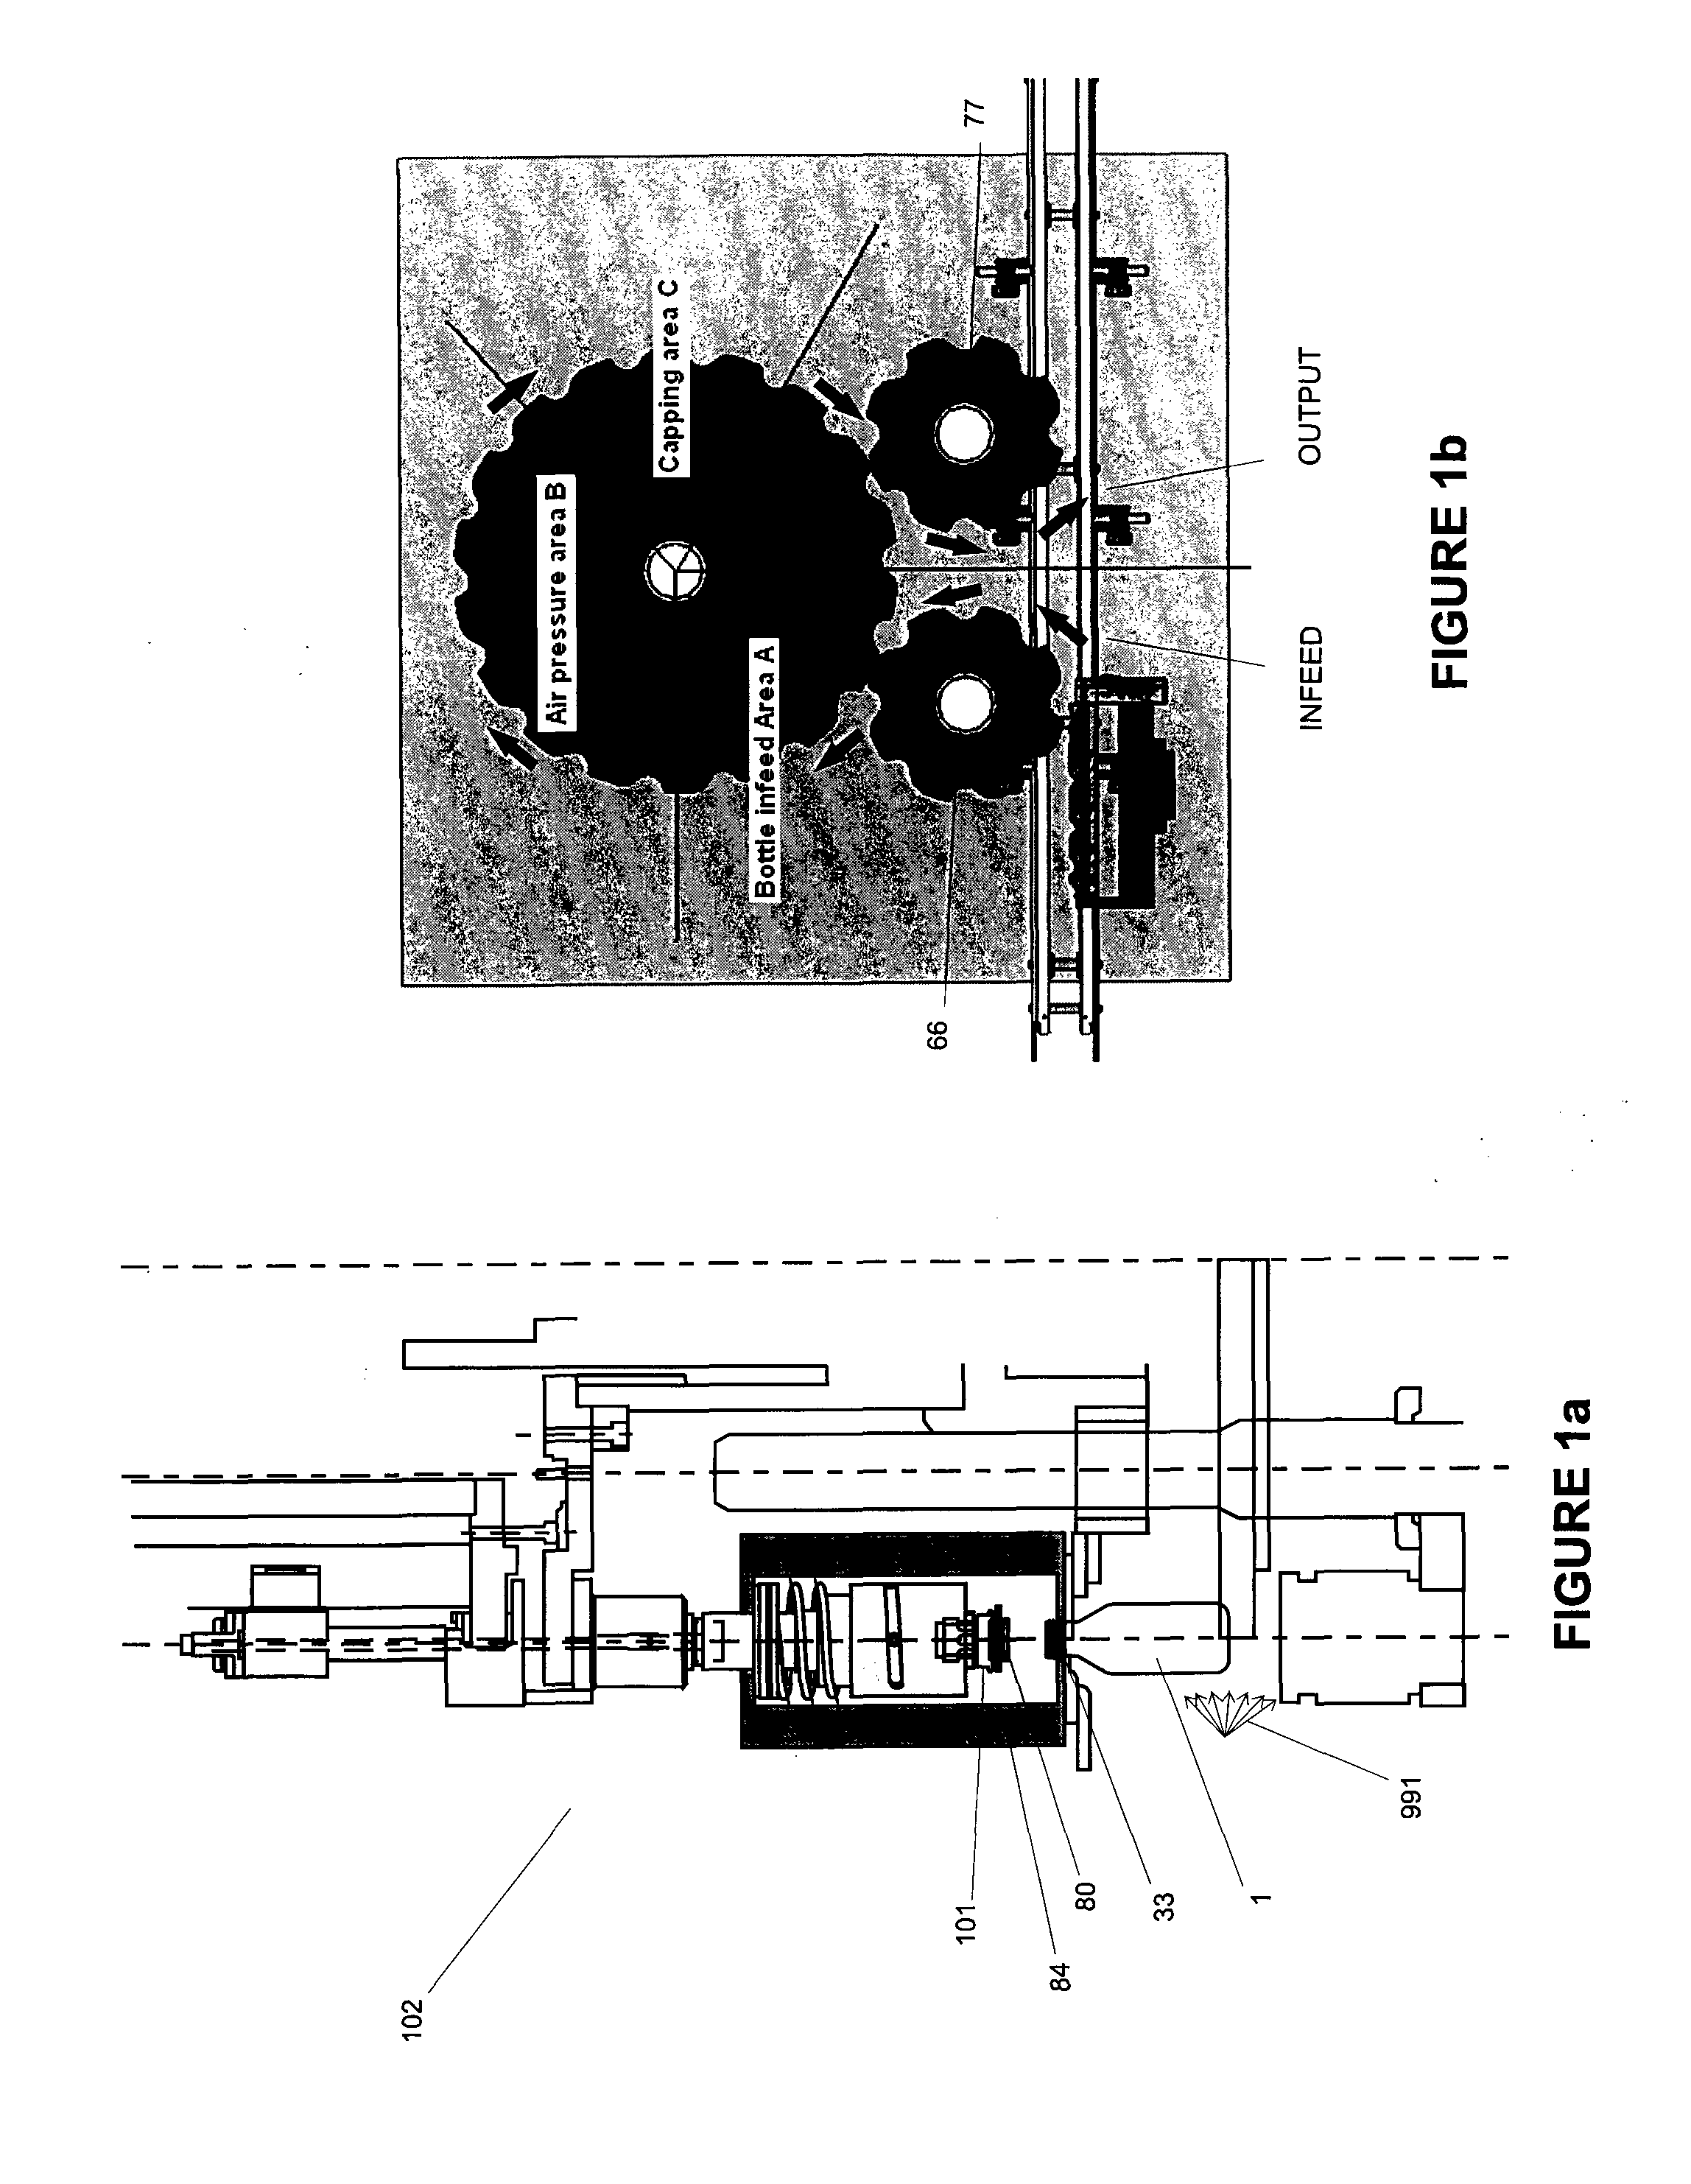 Controlled container headspace adjustment and apparatus therefor